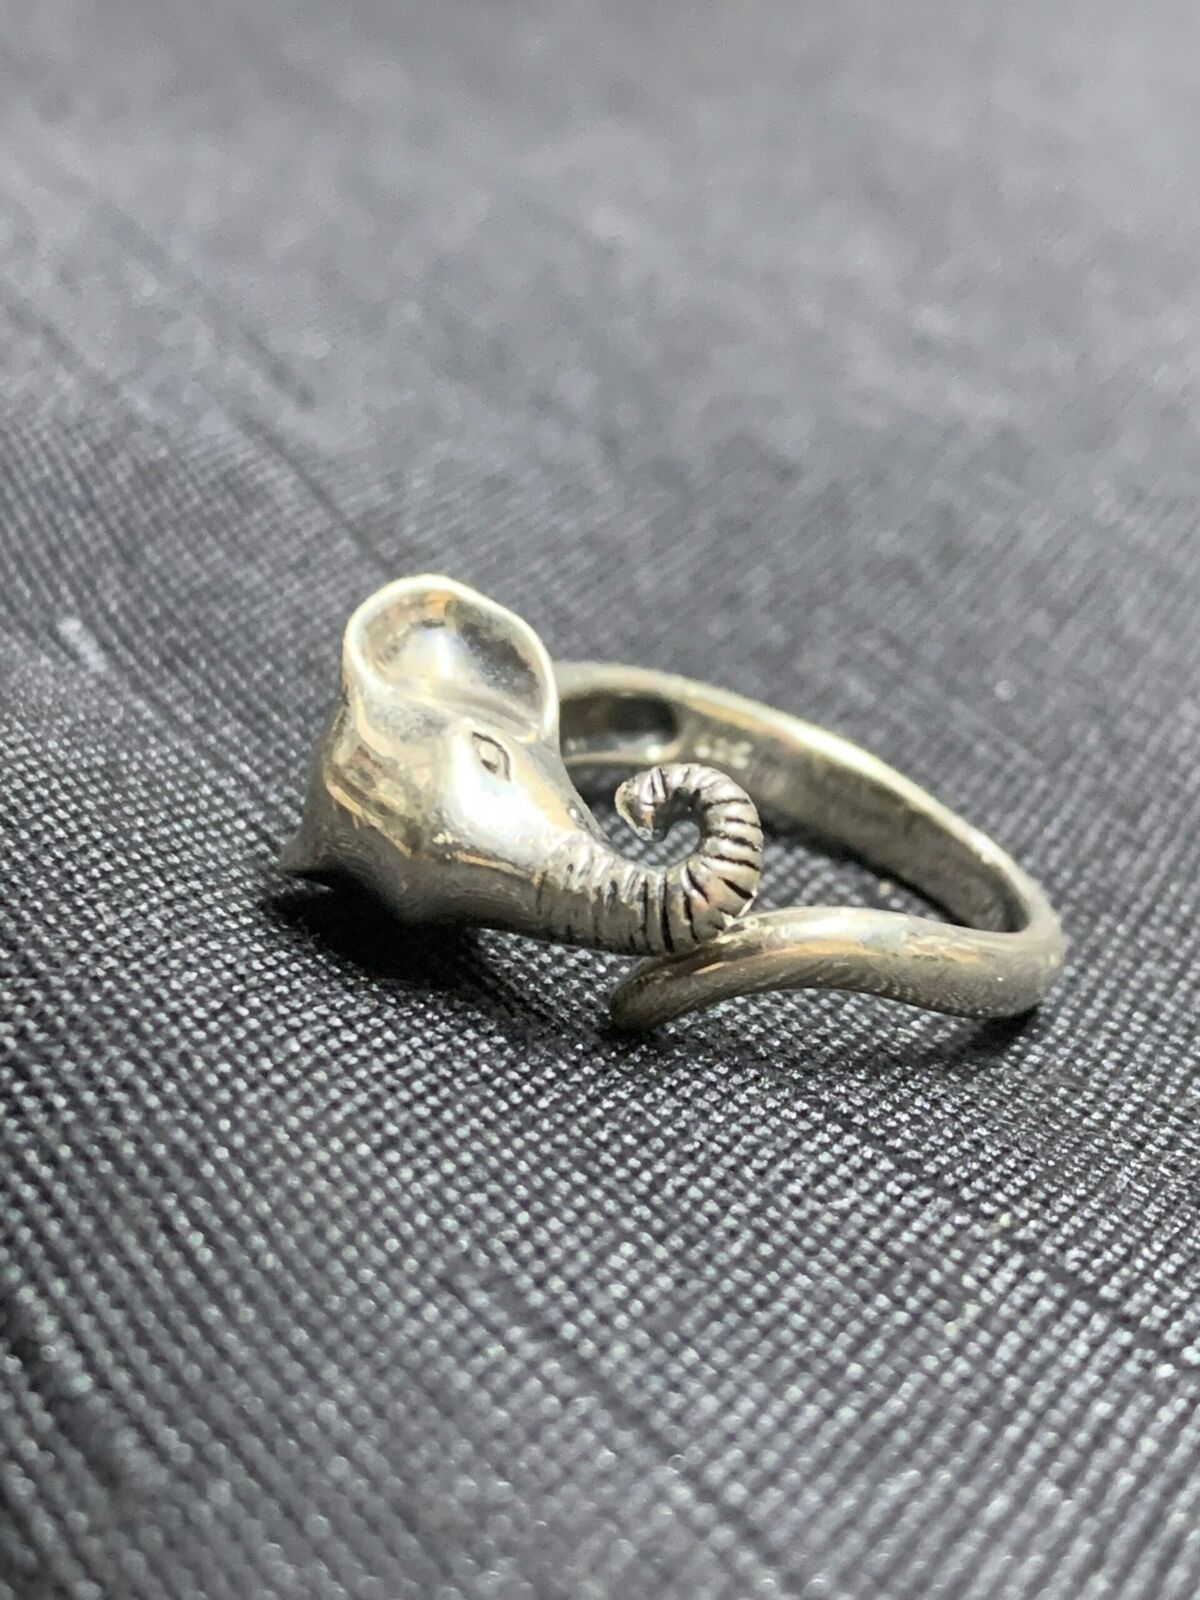 UNISEX SILVER RING - SILVER ELEPHANT WRAP AROUND RING